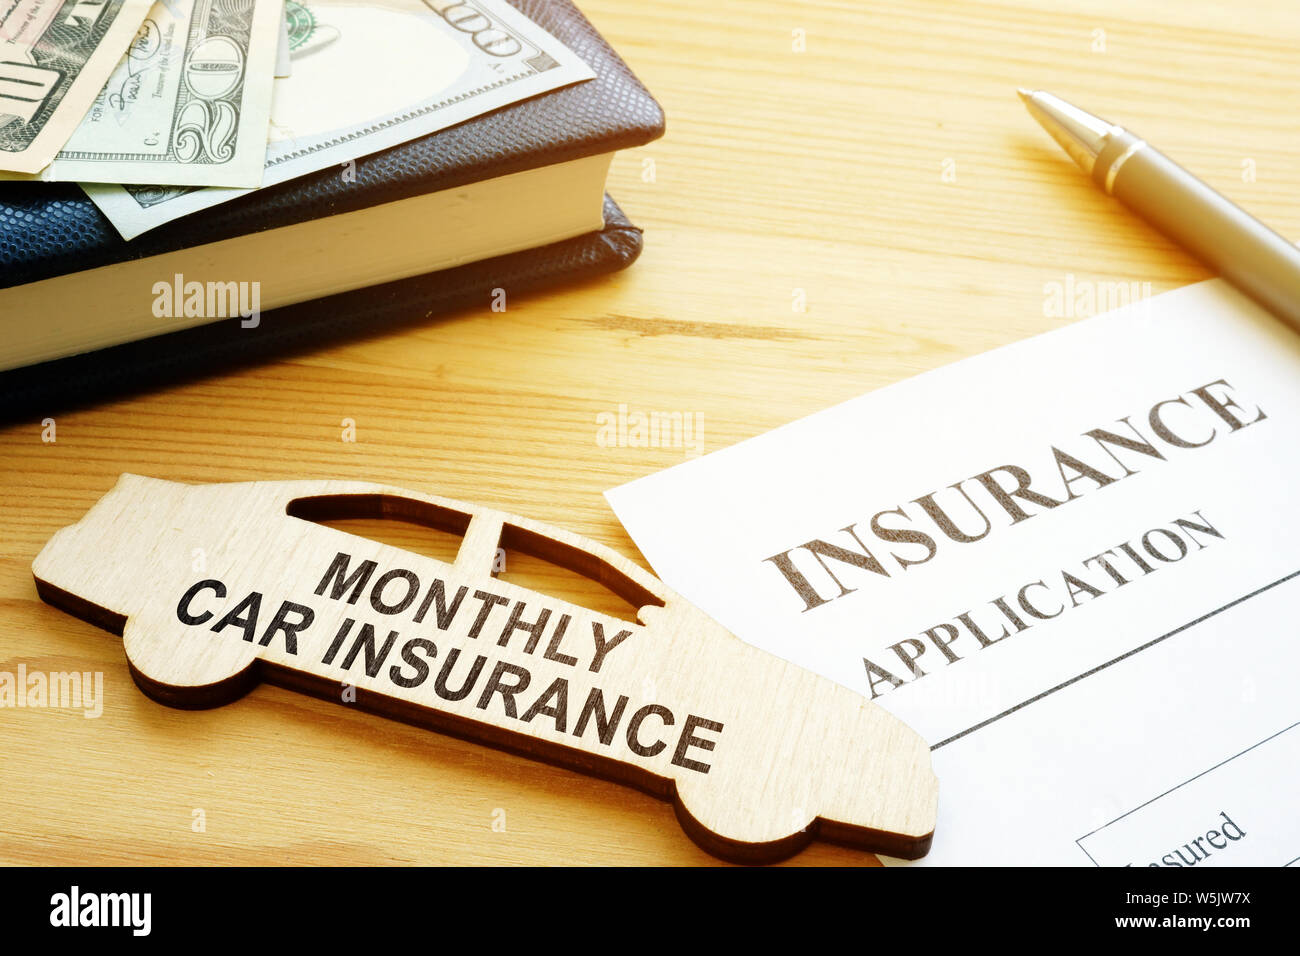 Monthly car insurance application form and money. Stock Photo